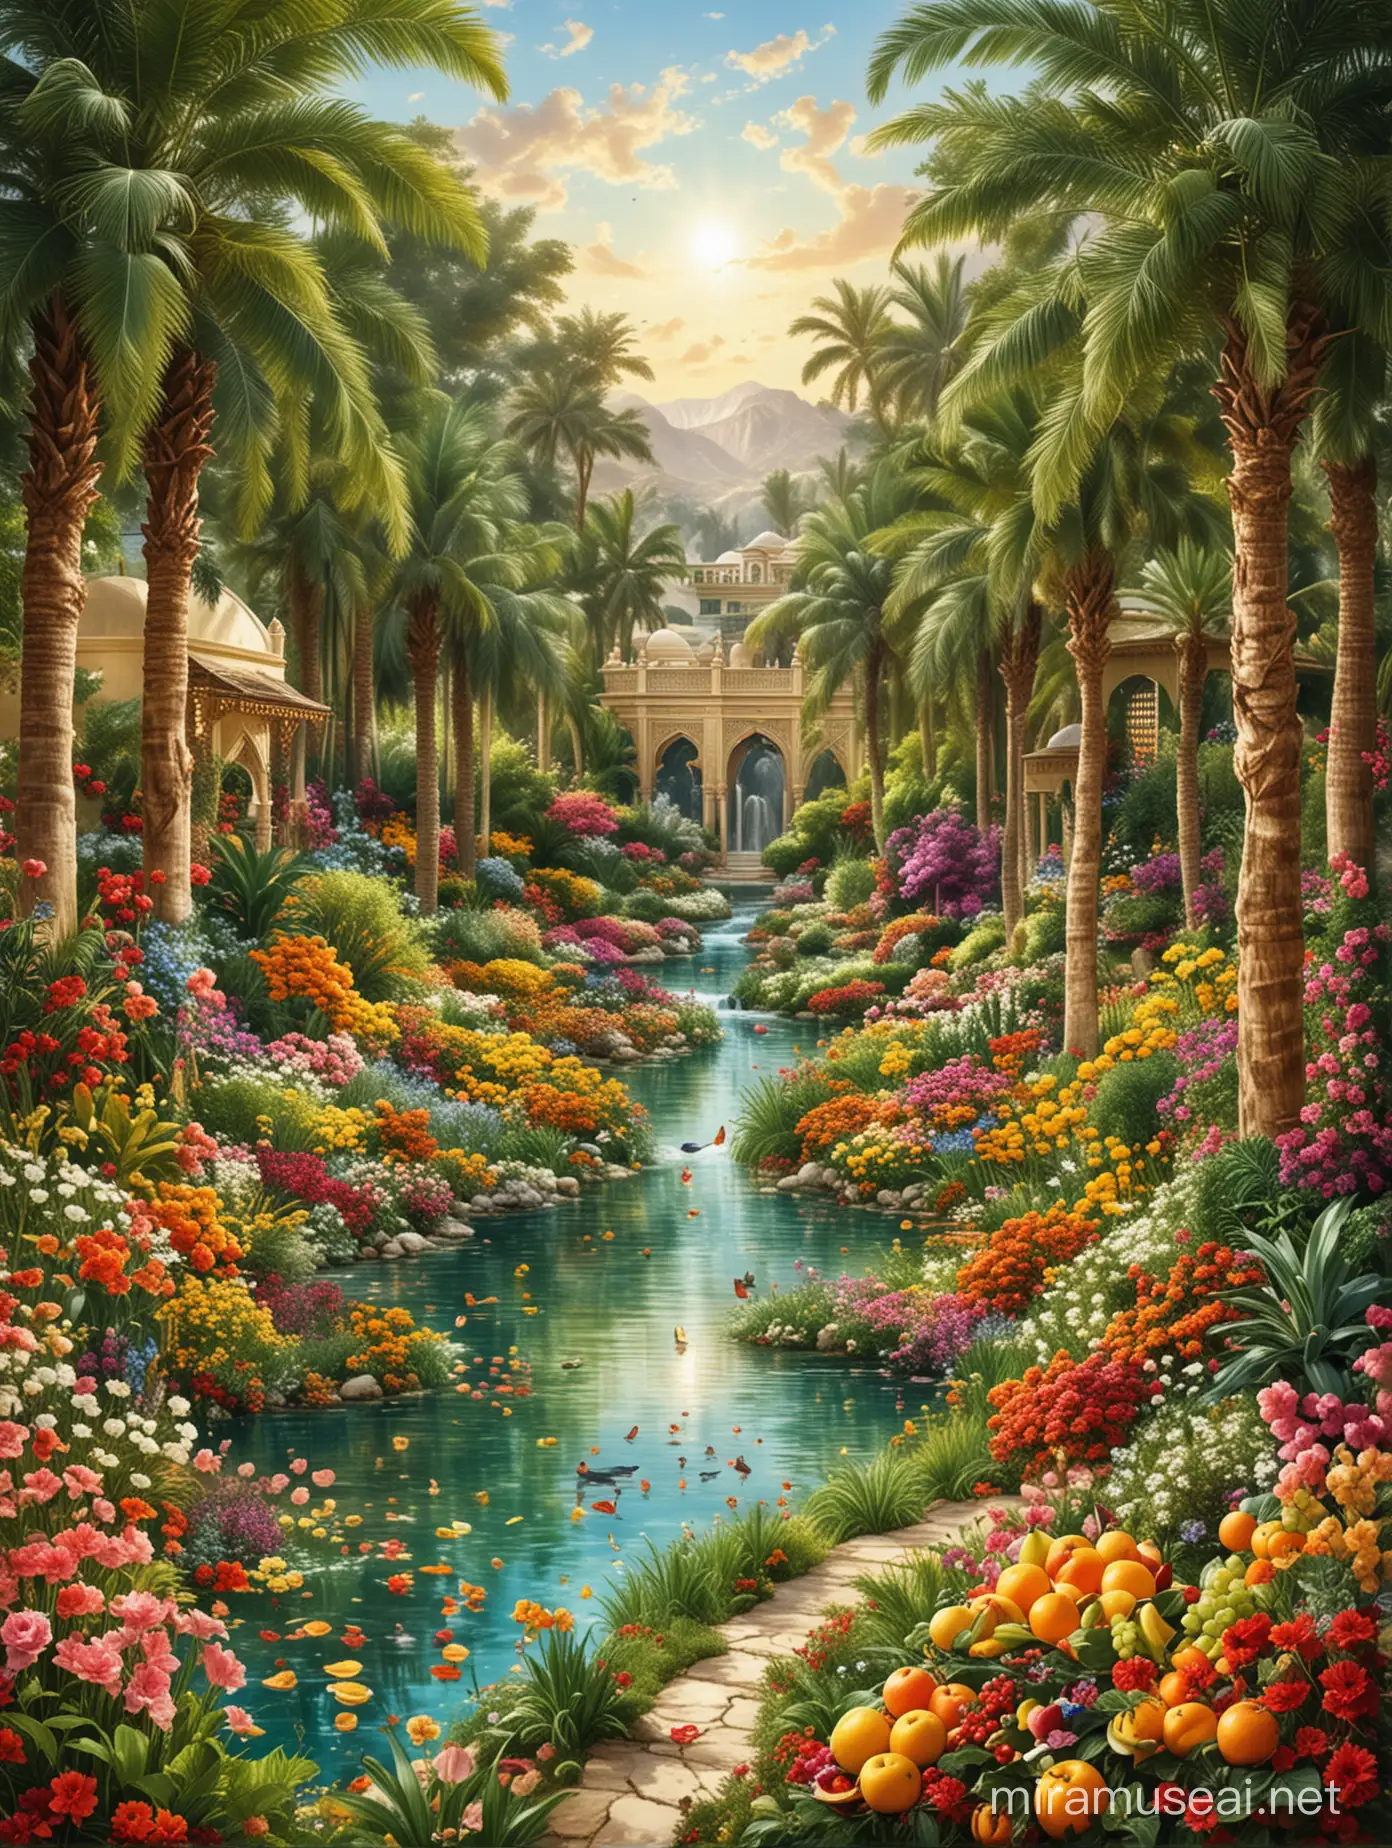 Quranic Paradise Eternal Joy with Lush Gardens and Heavenly Delights